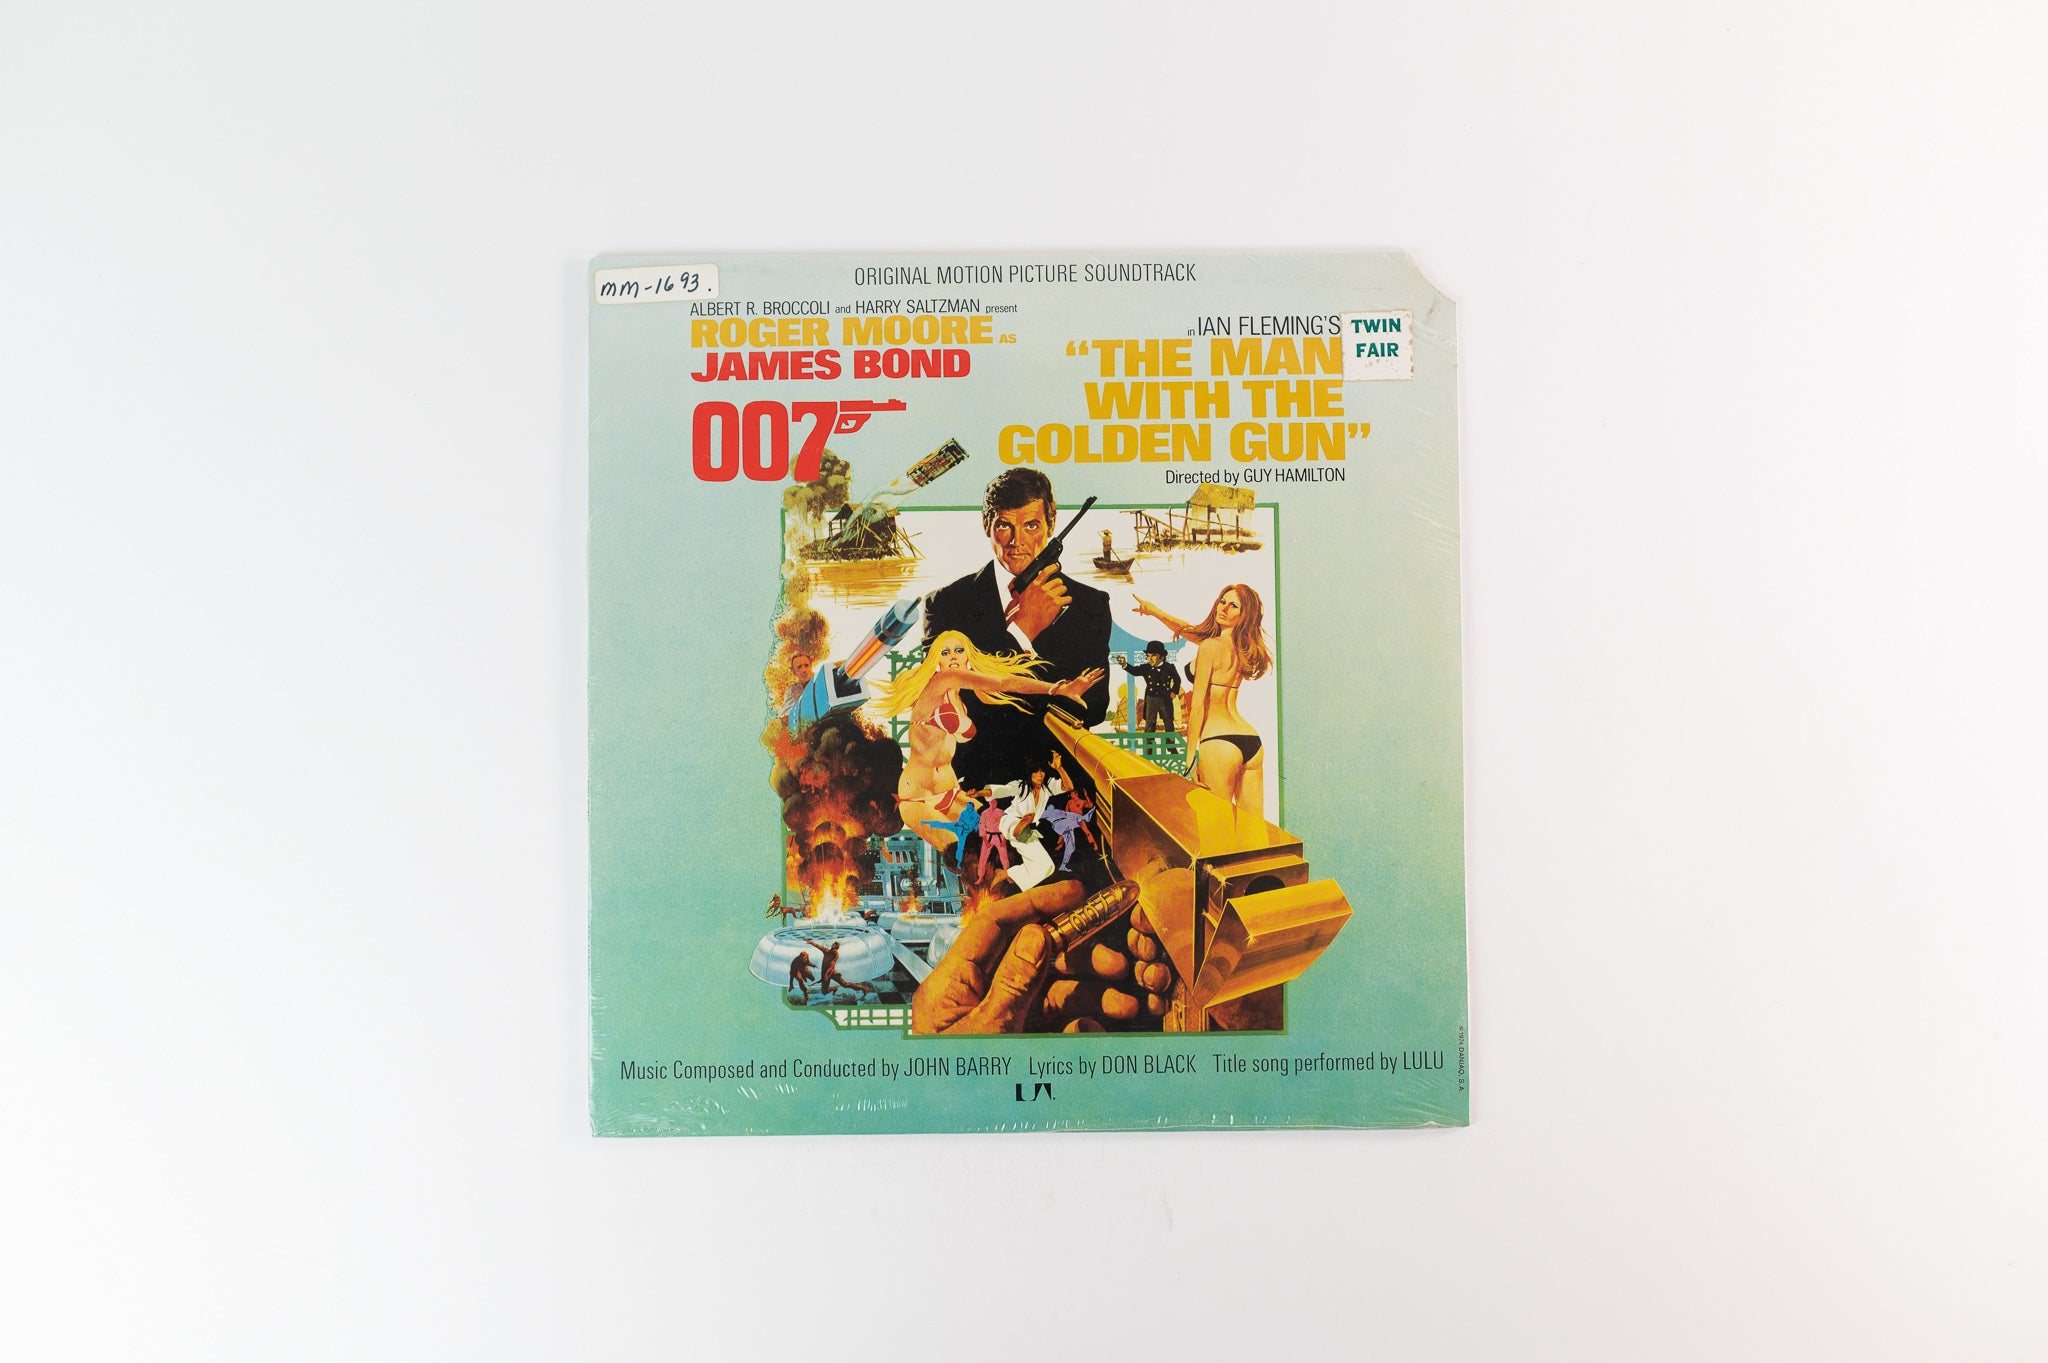 John Barry - The Man With The Golden Gun (Original Motion Picture Soundtrack) on UA Sealed